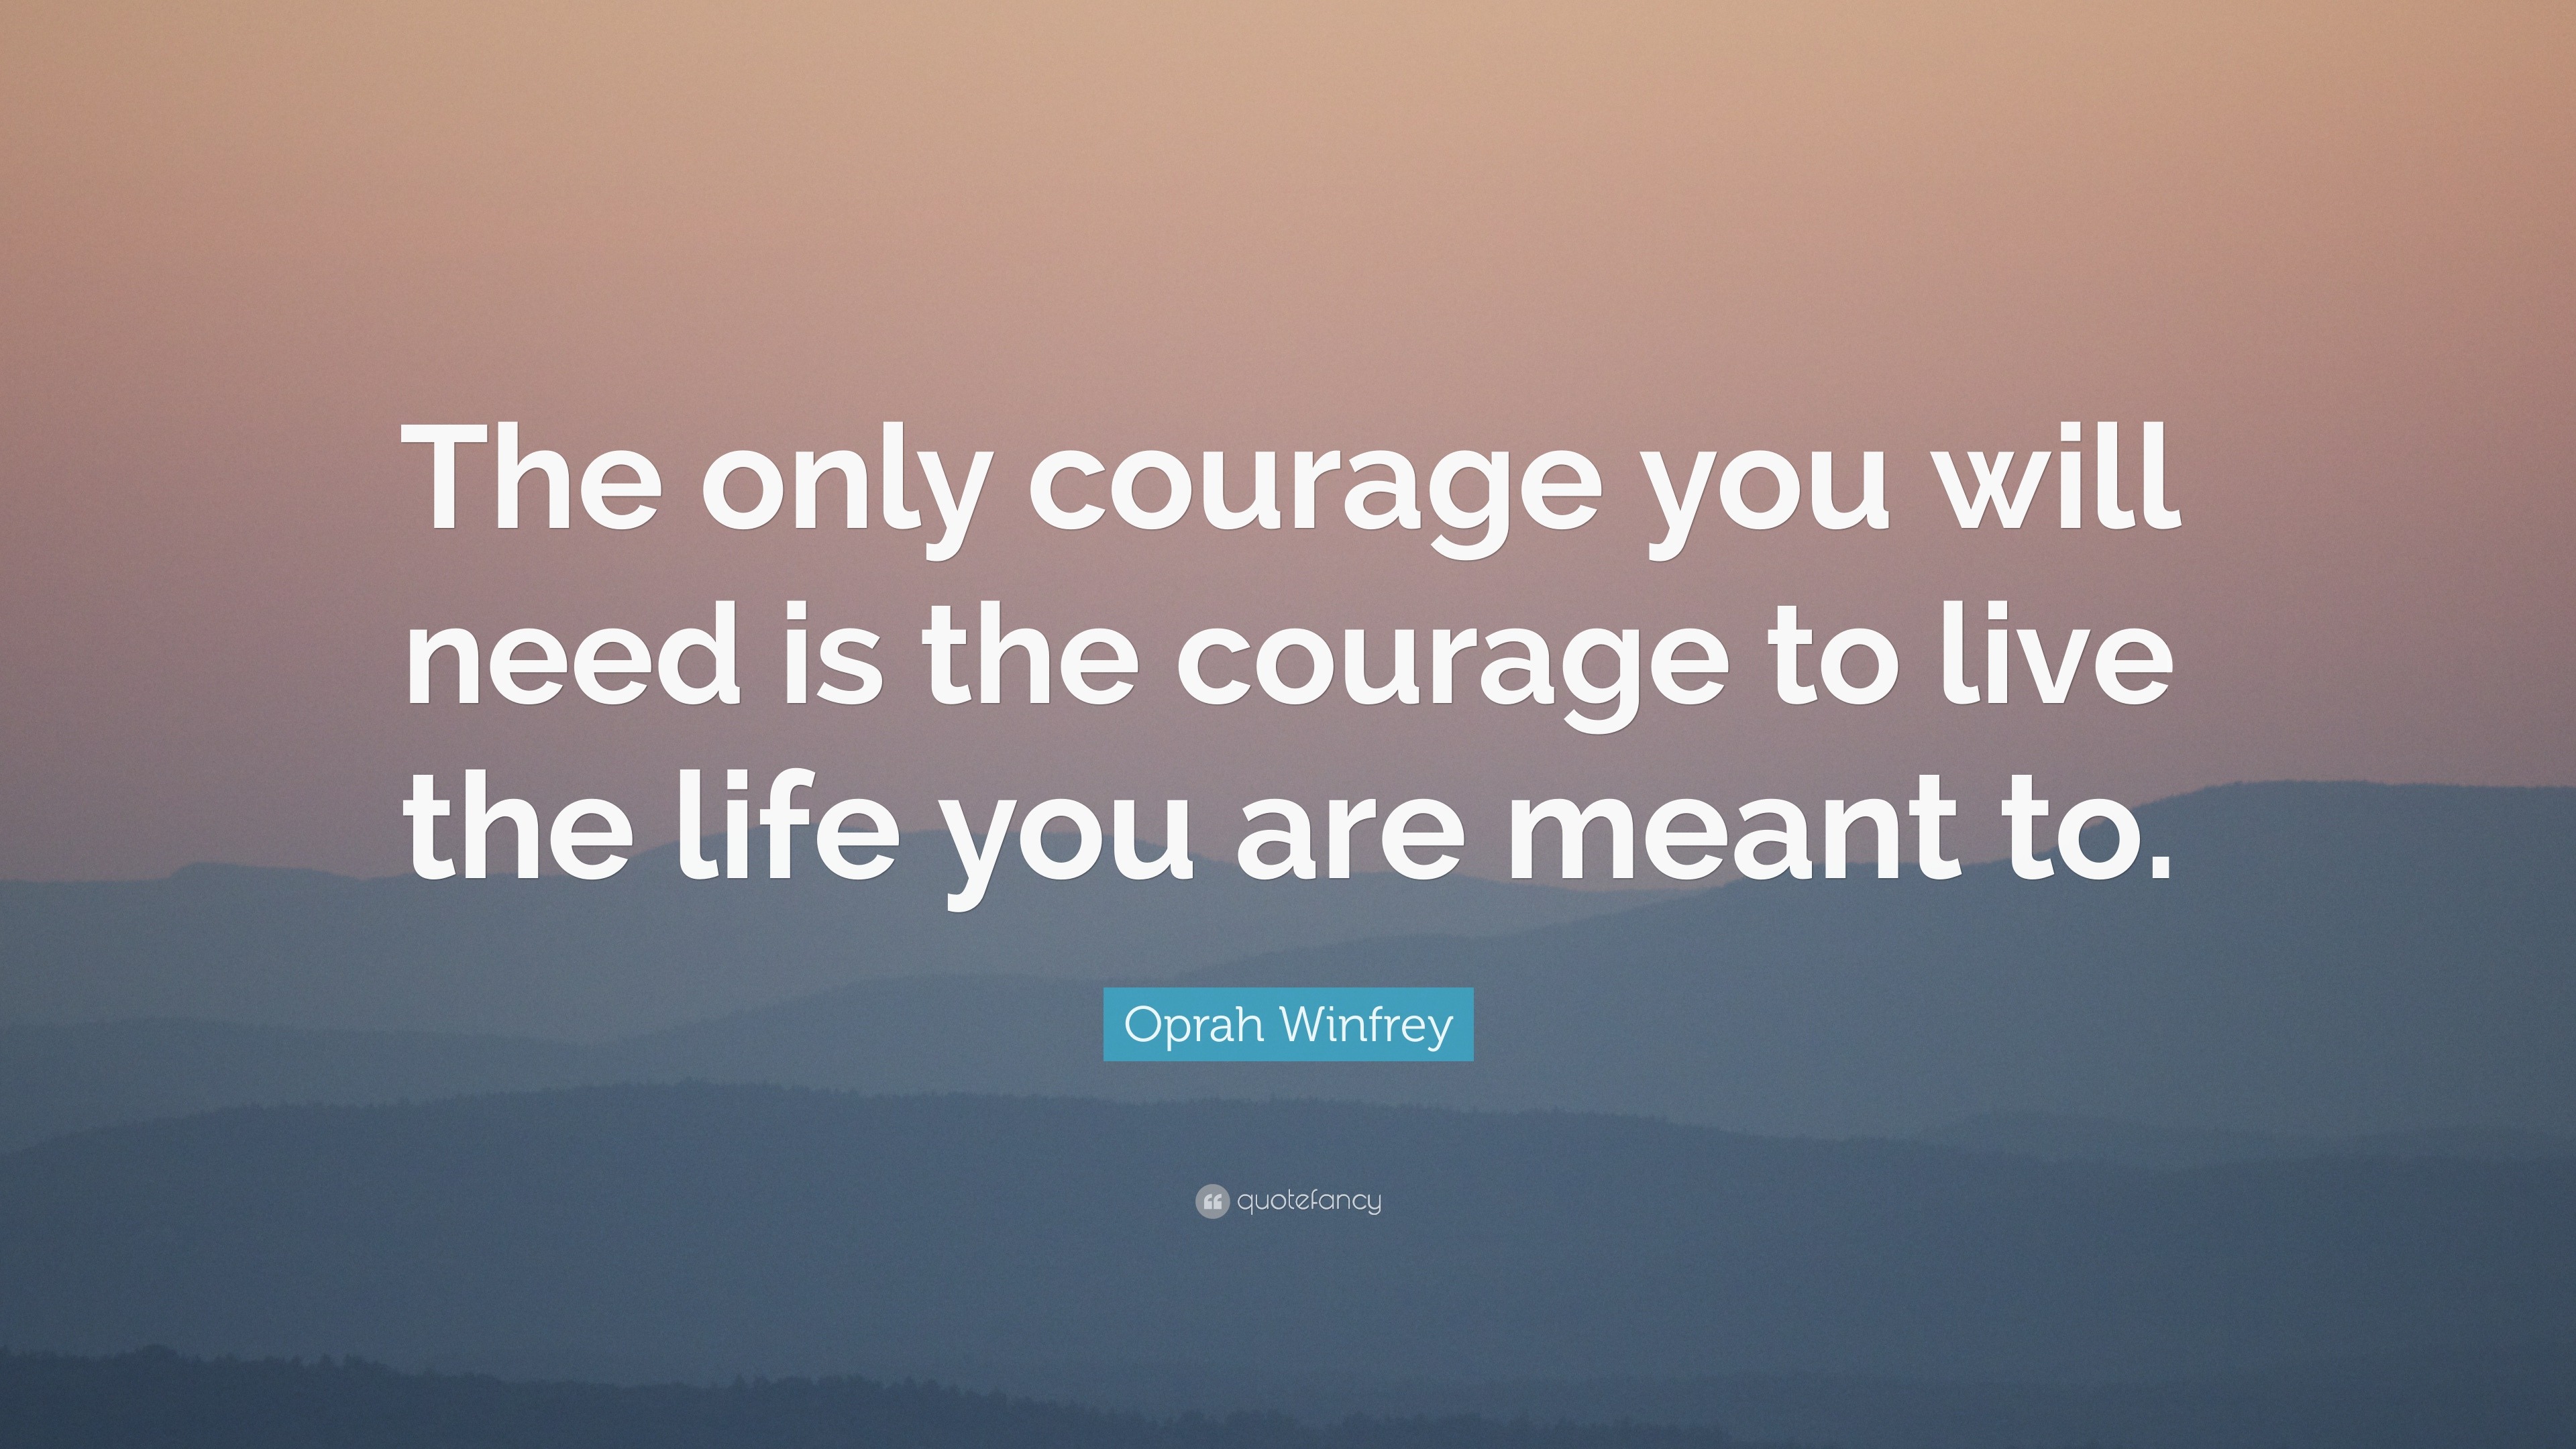 Oprah Winfrey Quote: “The only courage you will need is the courage to ...